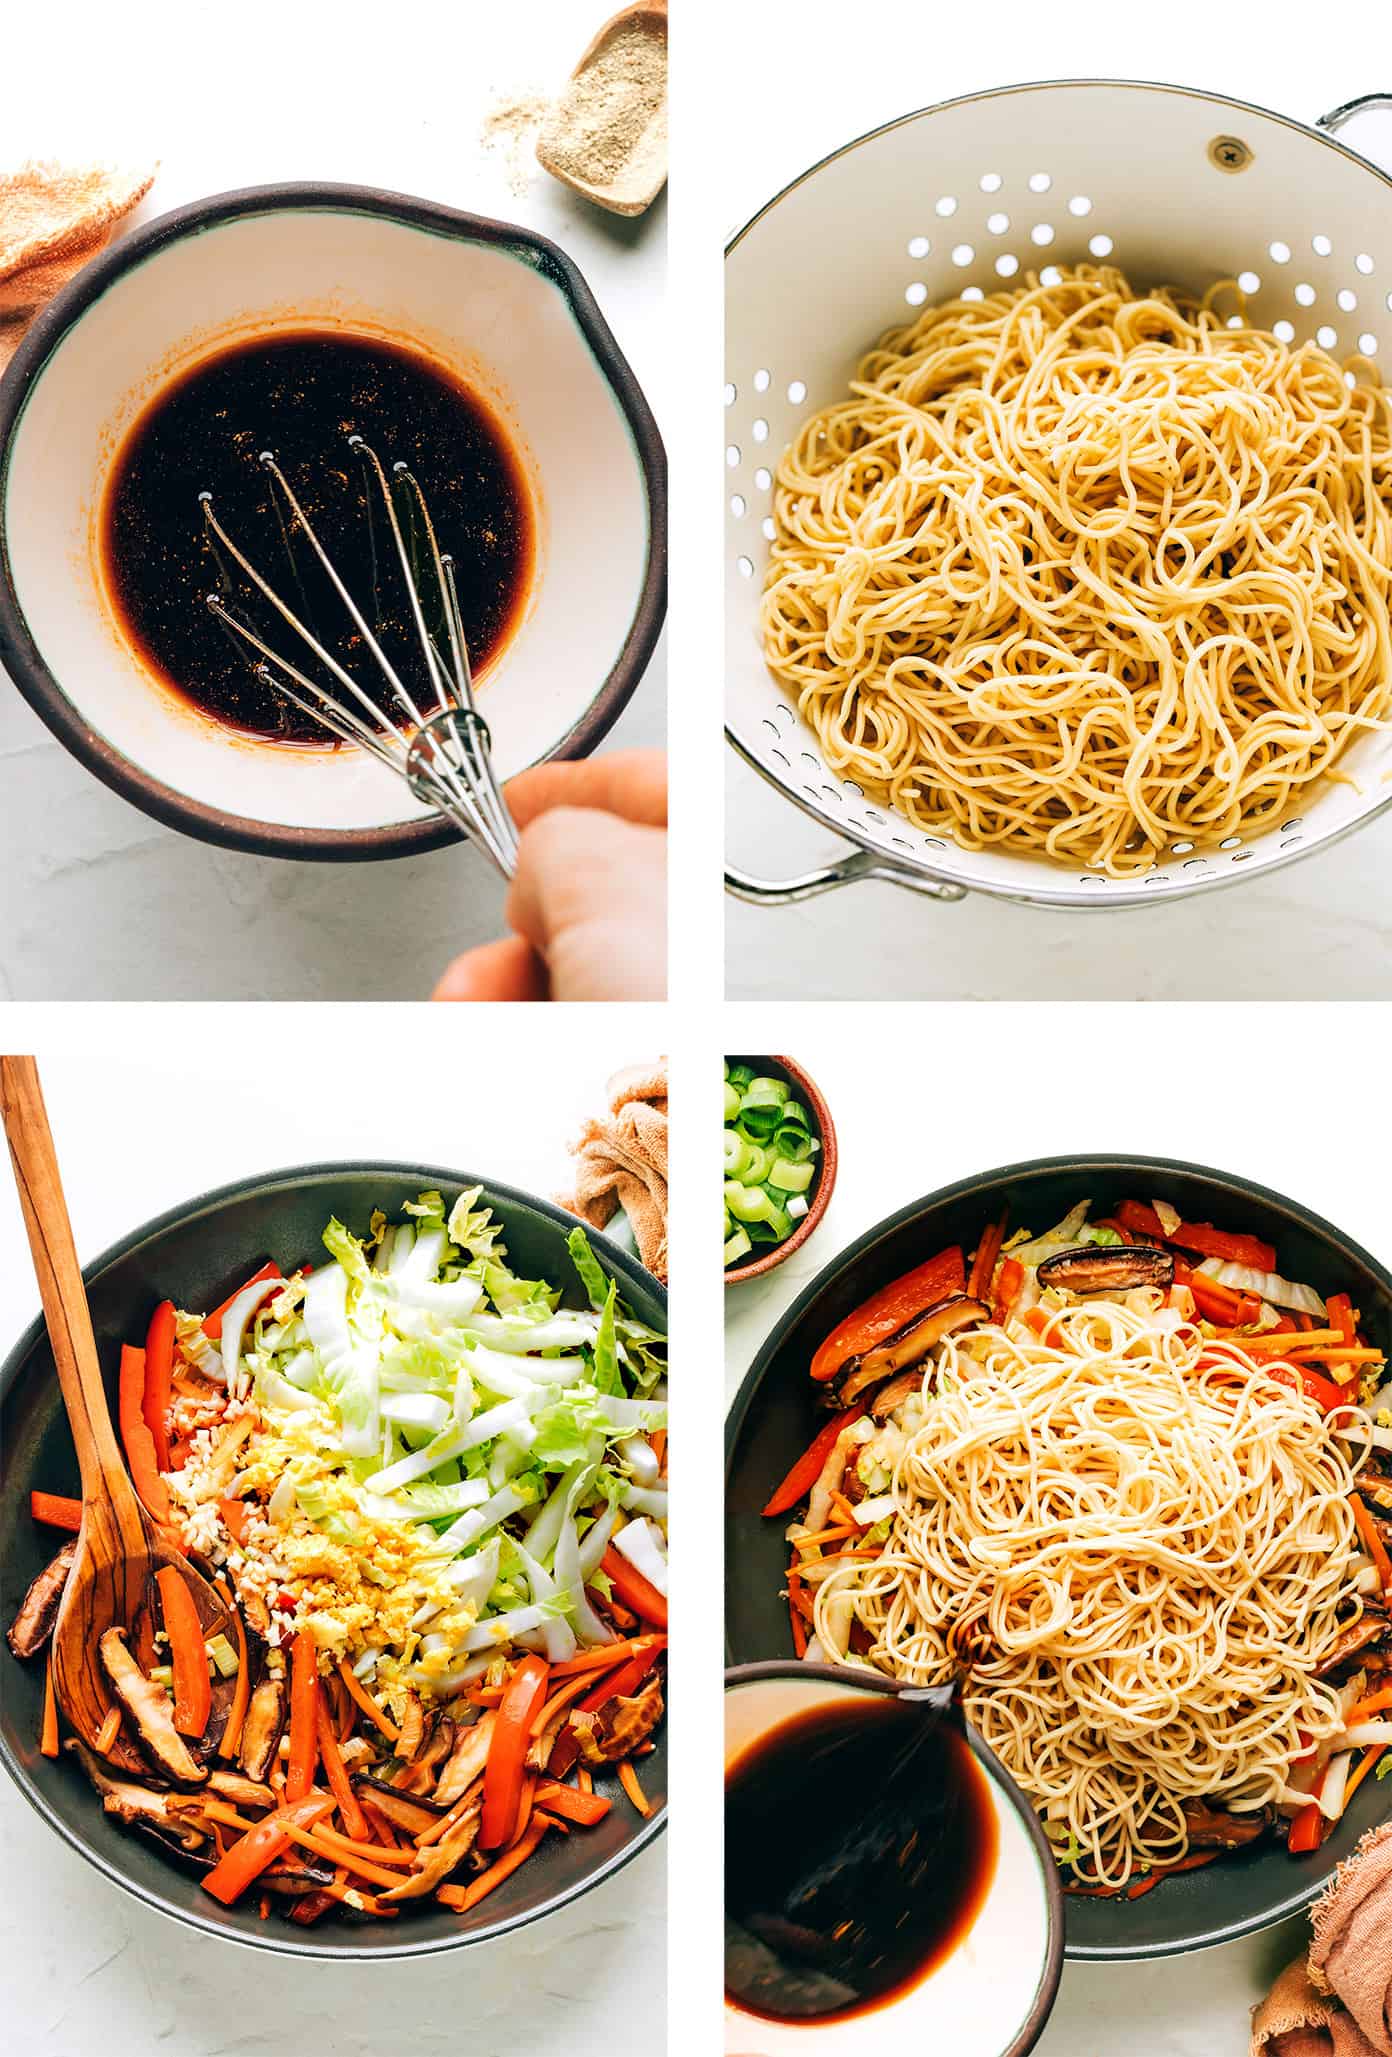 Step by step photo tutorial showing how to make chow mein